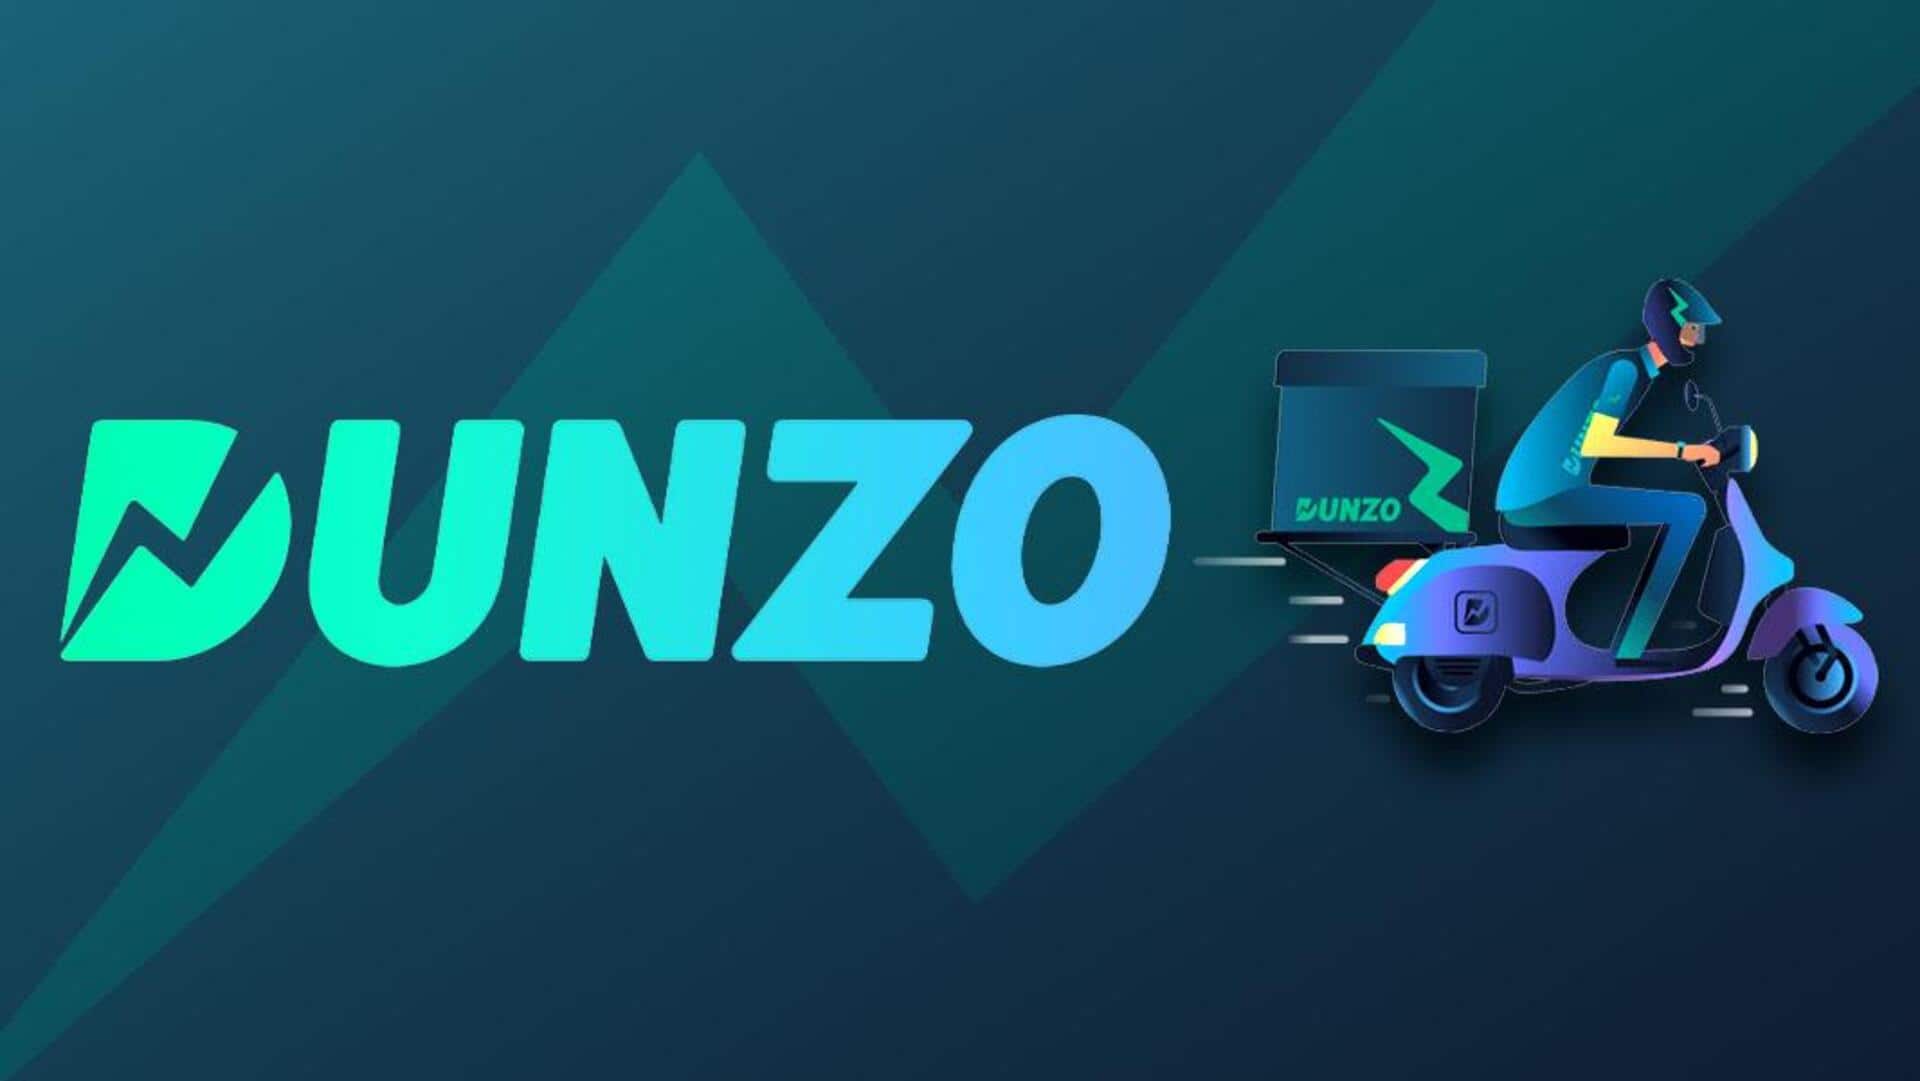 Dunzo nears $25-30 million funding boost to keep company afloat